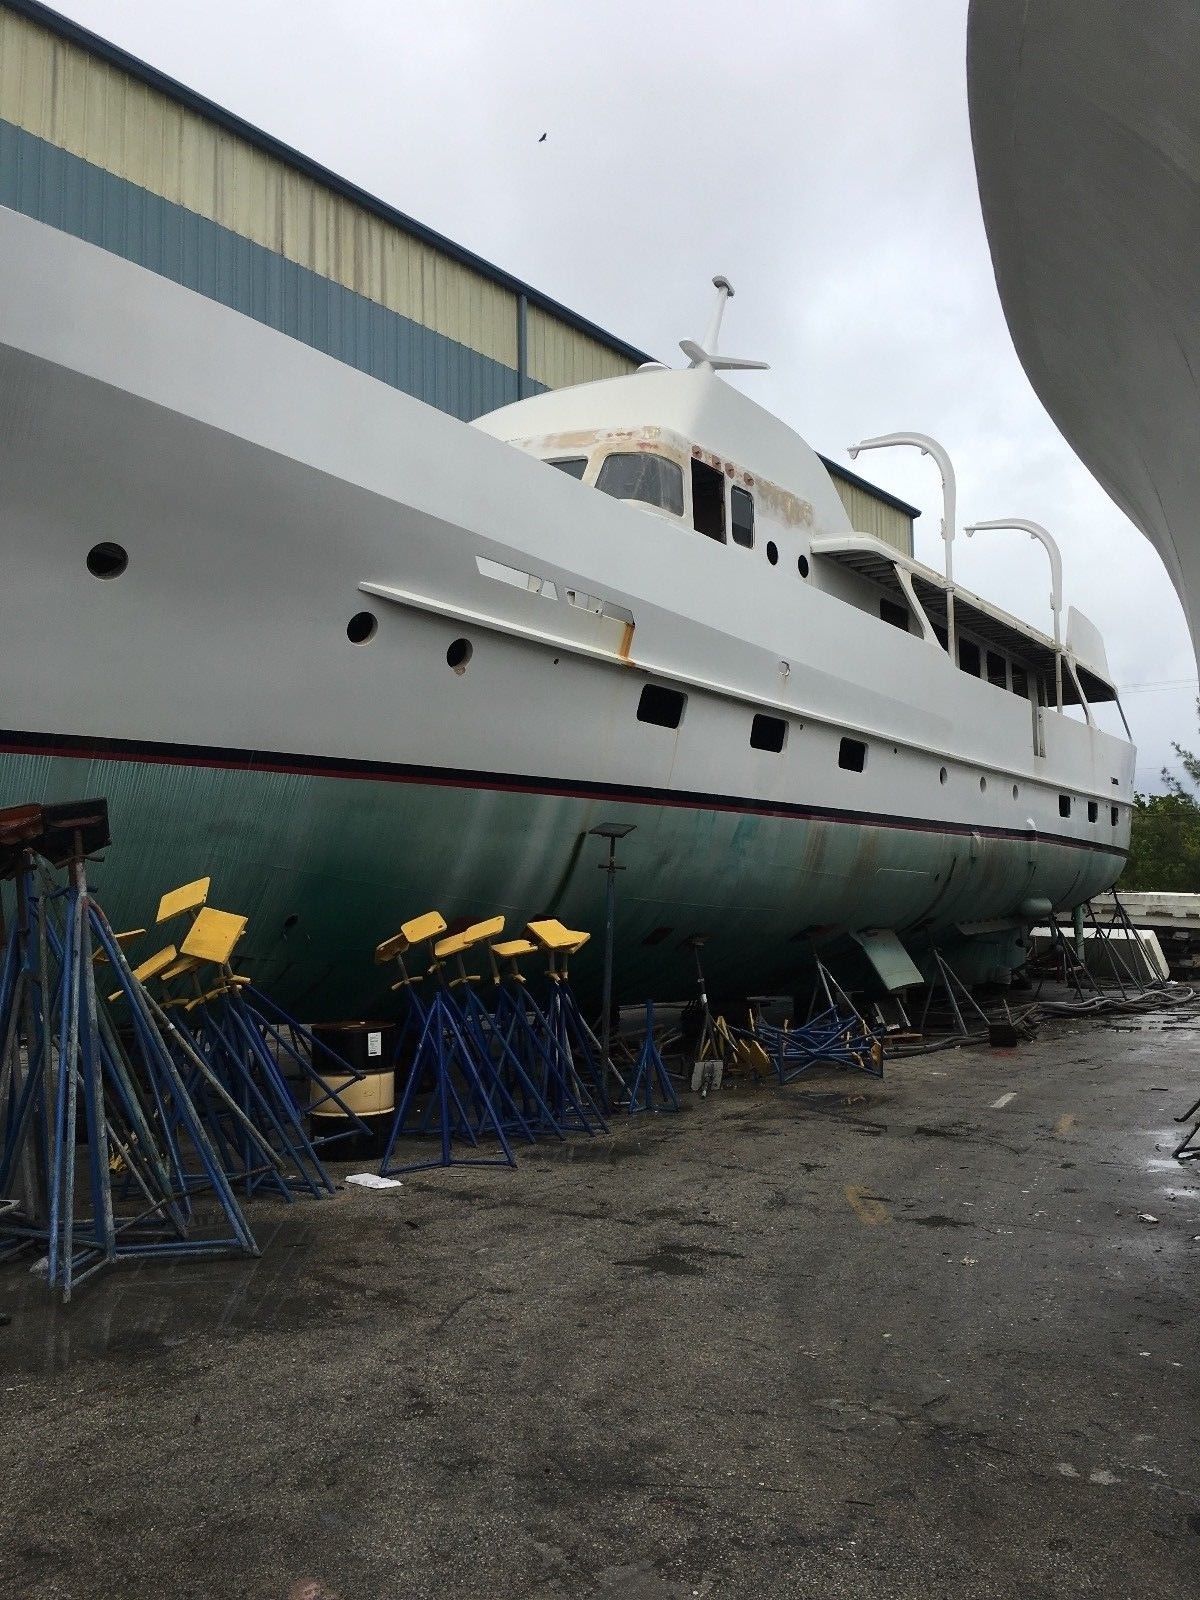 Feadship Feadship 1960 for sale for $10,000 - Boats-from 